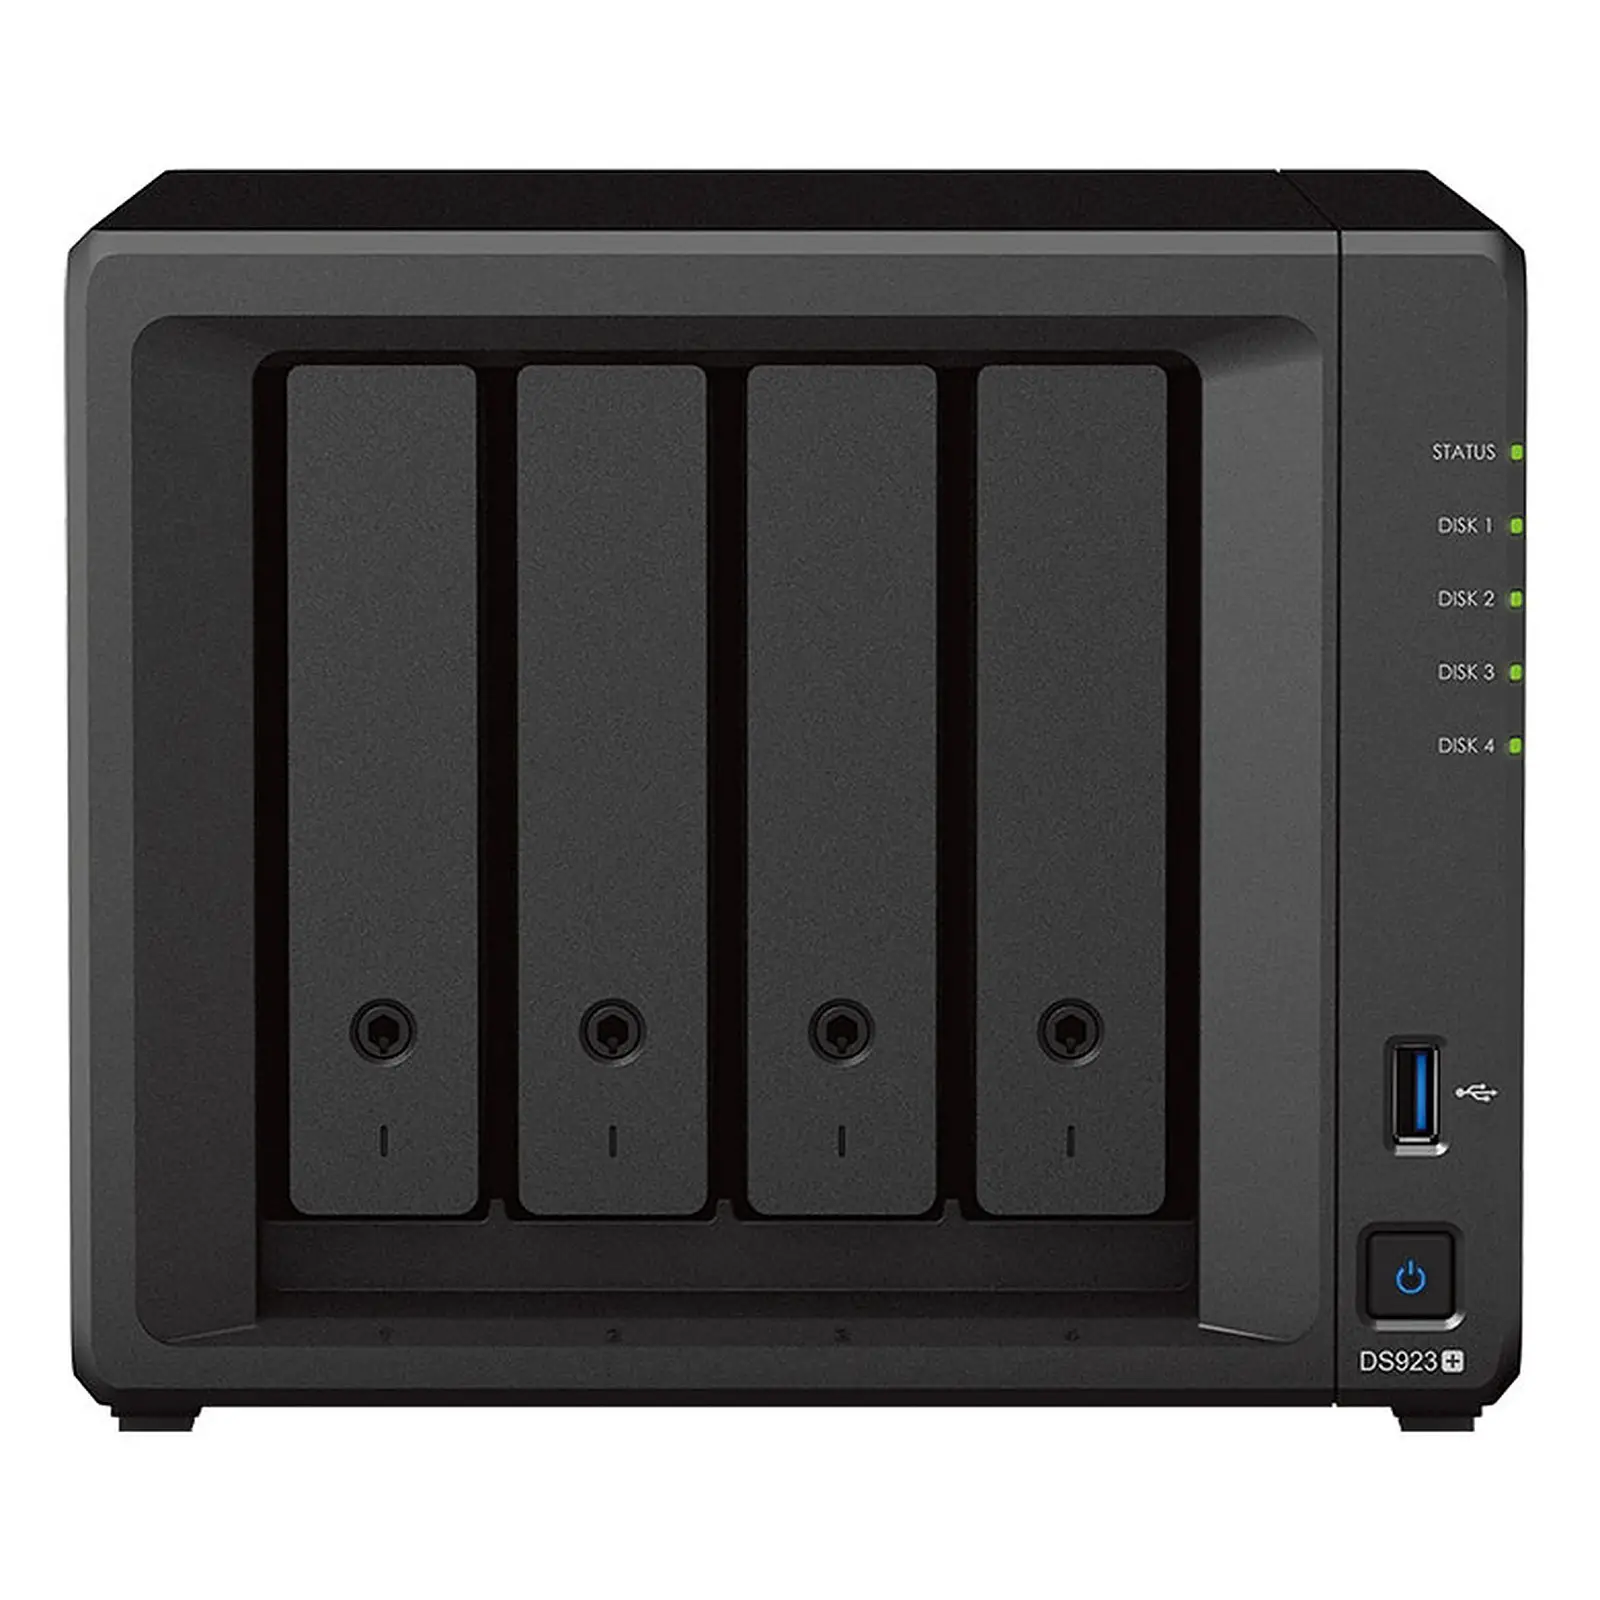 Design Synology DS923+